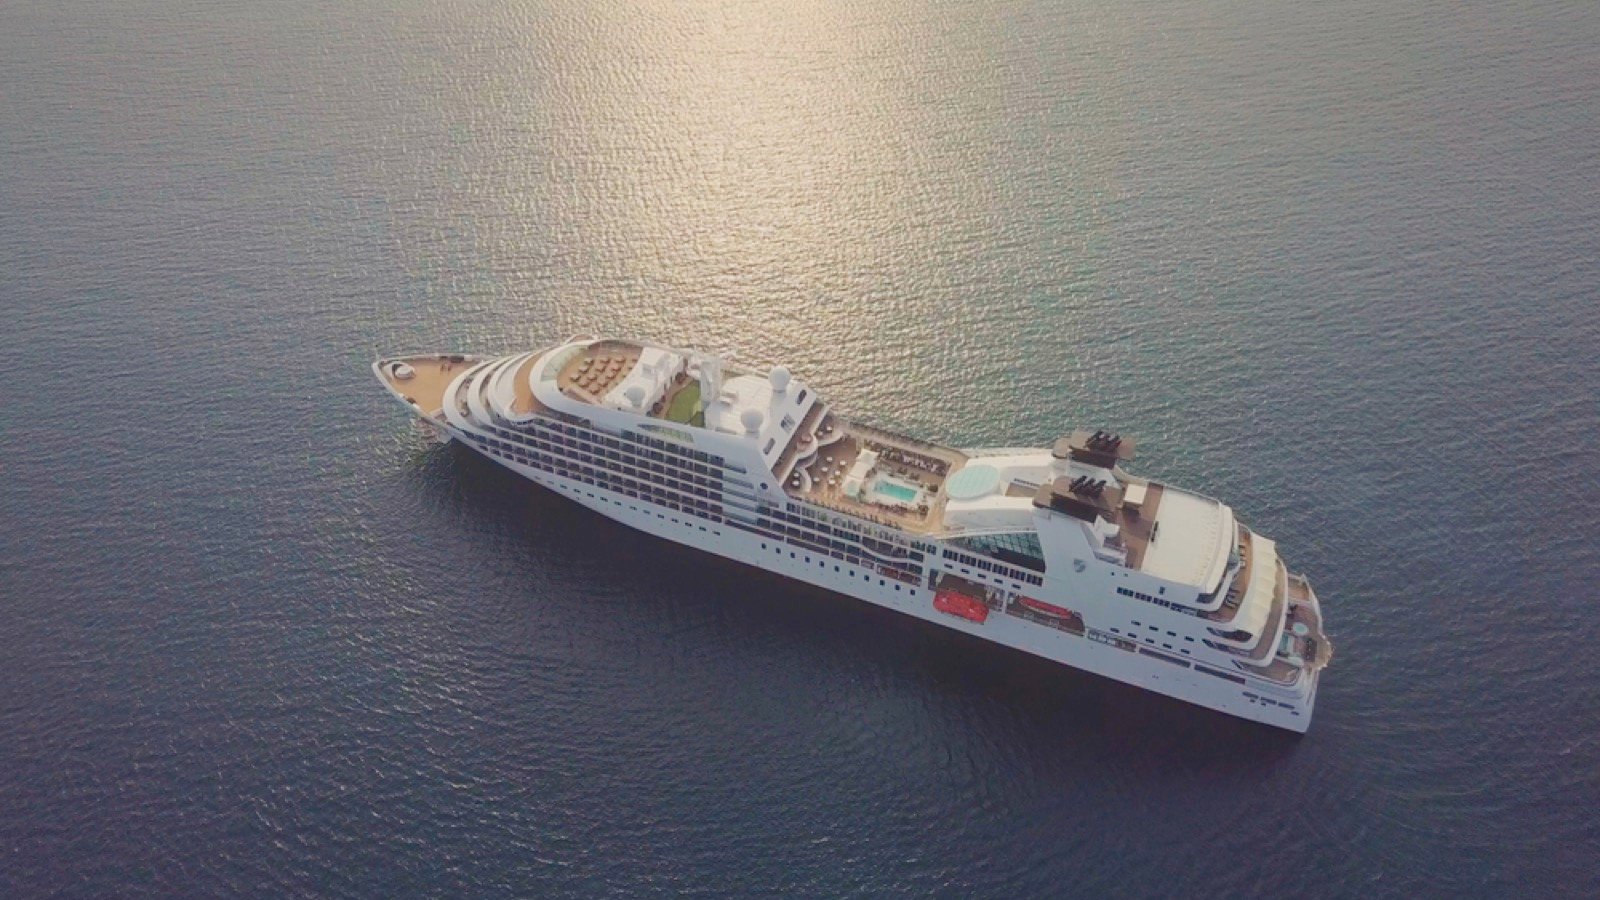 <p>Embark on a 129-day luxurious journey with Seabourn Sojourn, where starting at $196,649 per person, where you can indulge in the opulence of the Owner’s Suite. This suite is not just a room but a haven with a dining area for four, a full entertainment center, and a bathroom topped with granite. Your journey will be accompanied by fine Egyptian cotton linens, personalized stationery, a wellness bag with fitness gear, and a personal steward to ensure every need is met, making every day at sea as splendid as the last.</p>